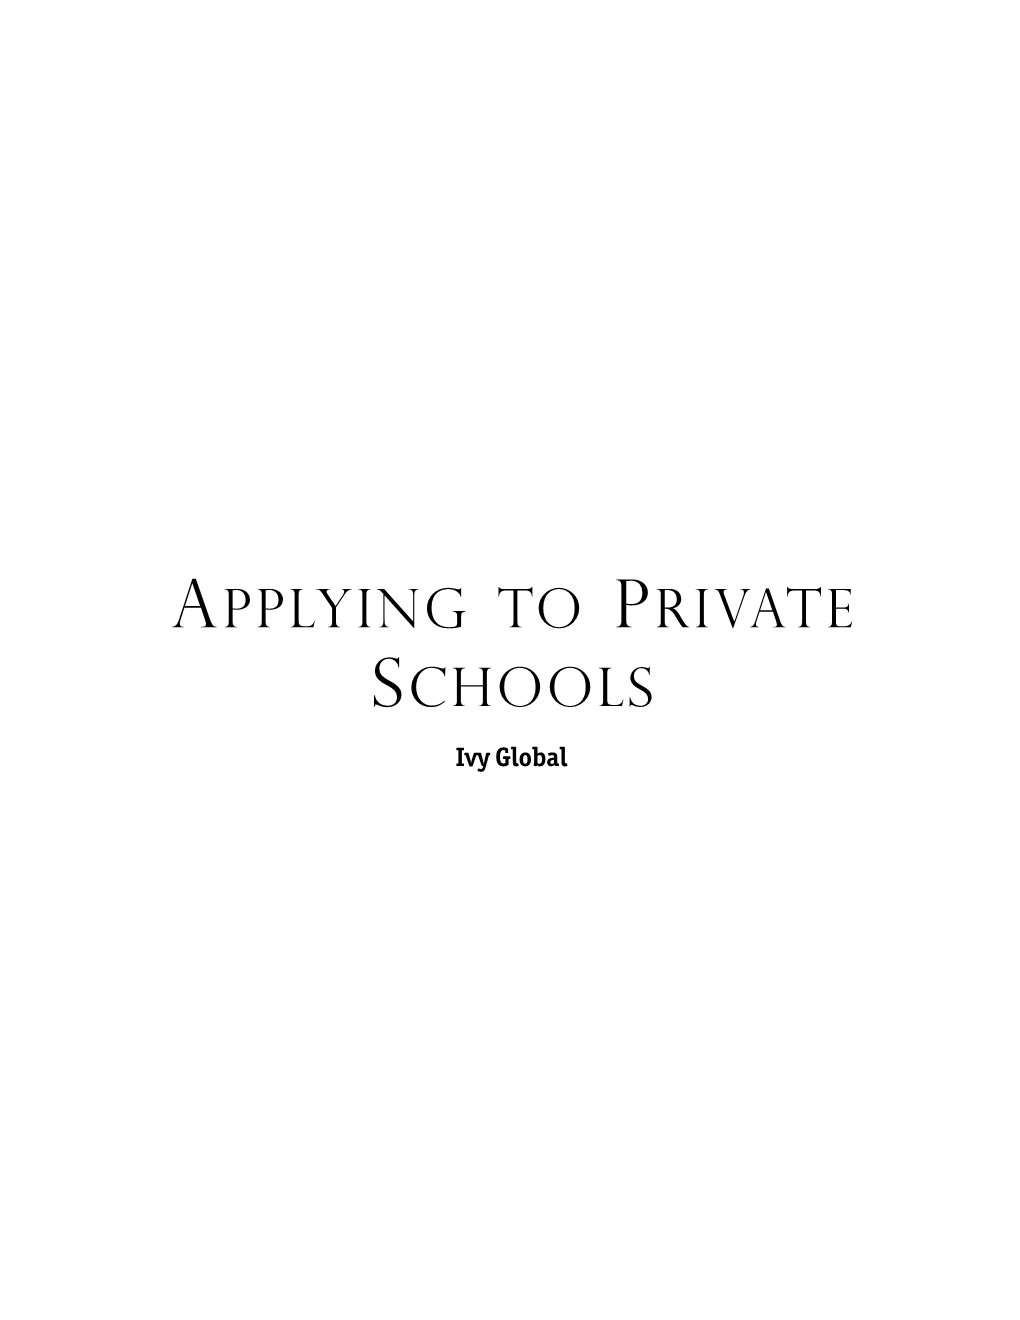 Applying to Private Schools